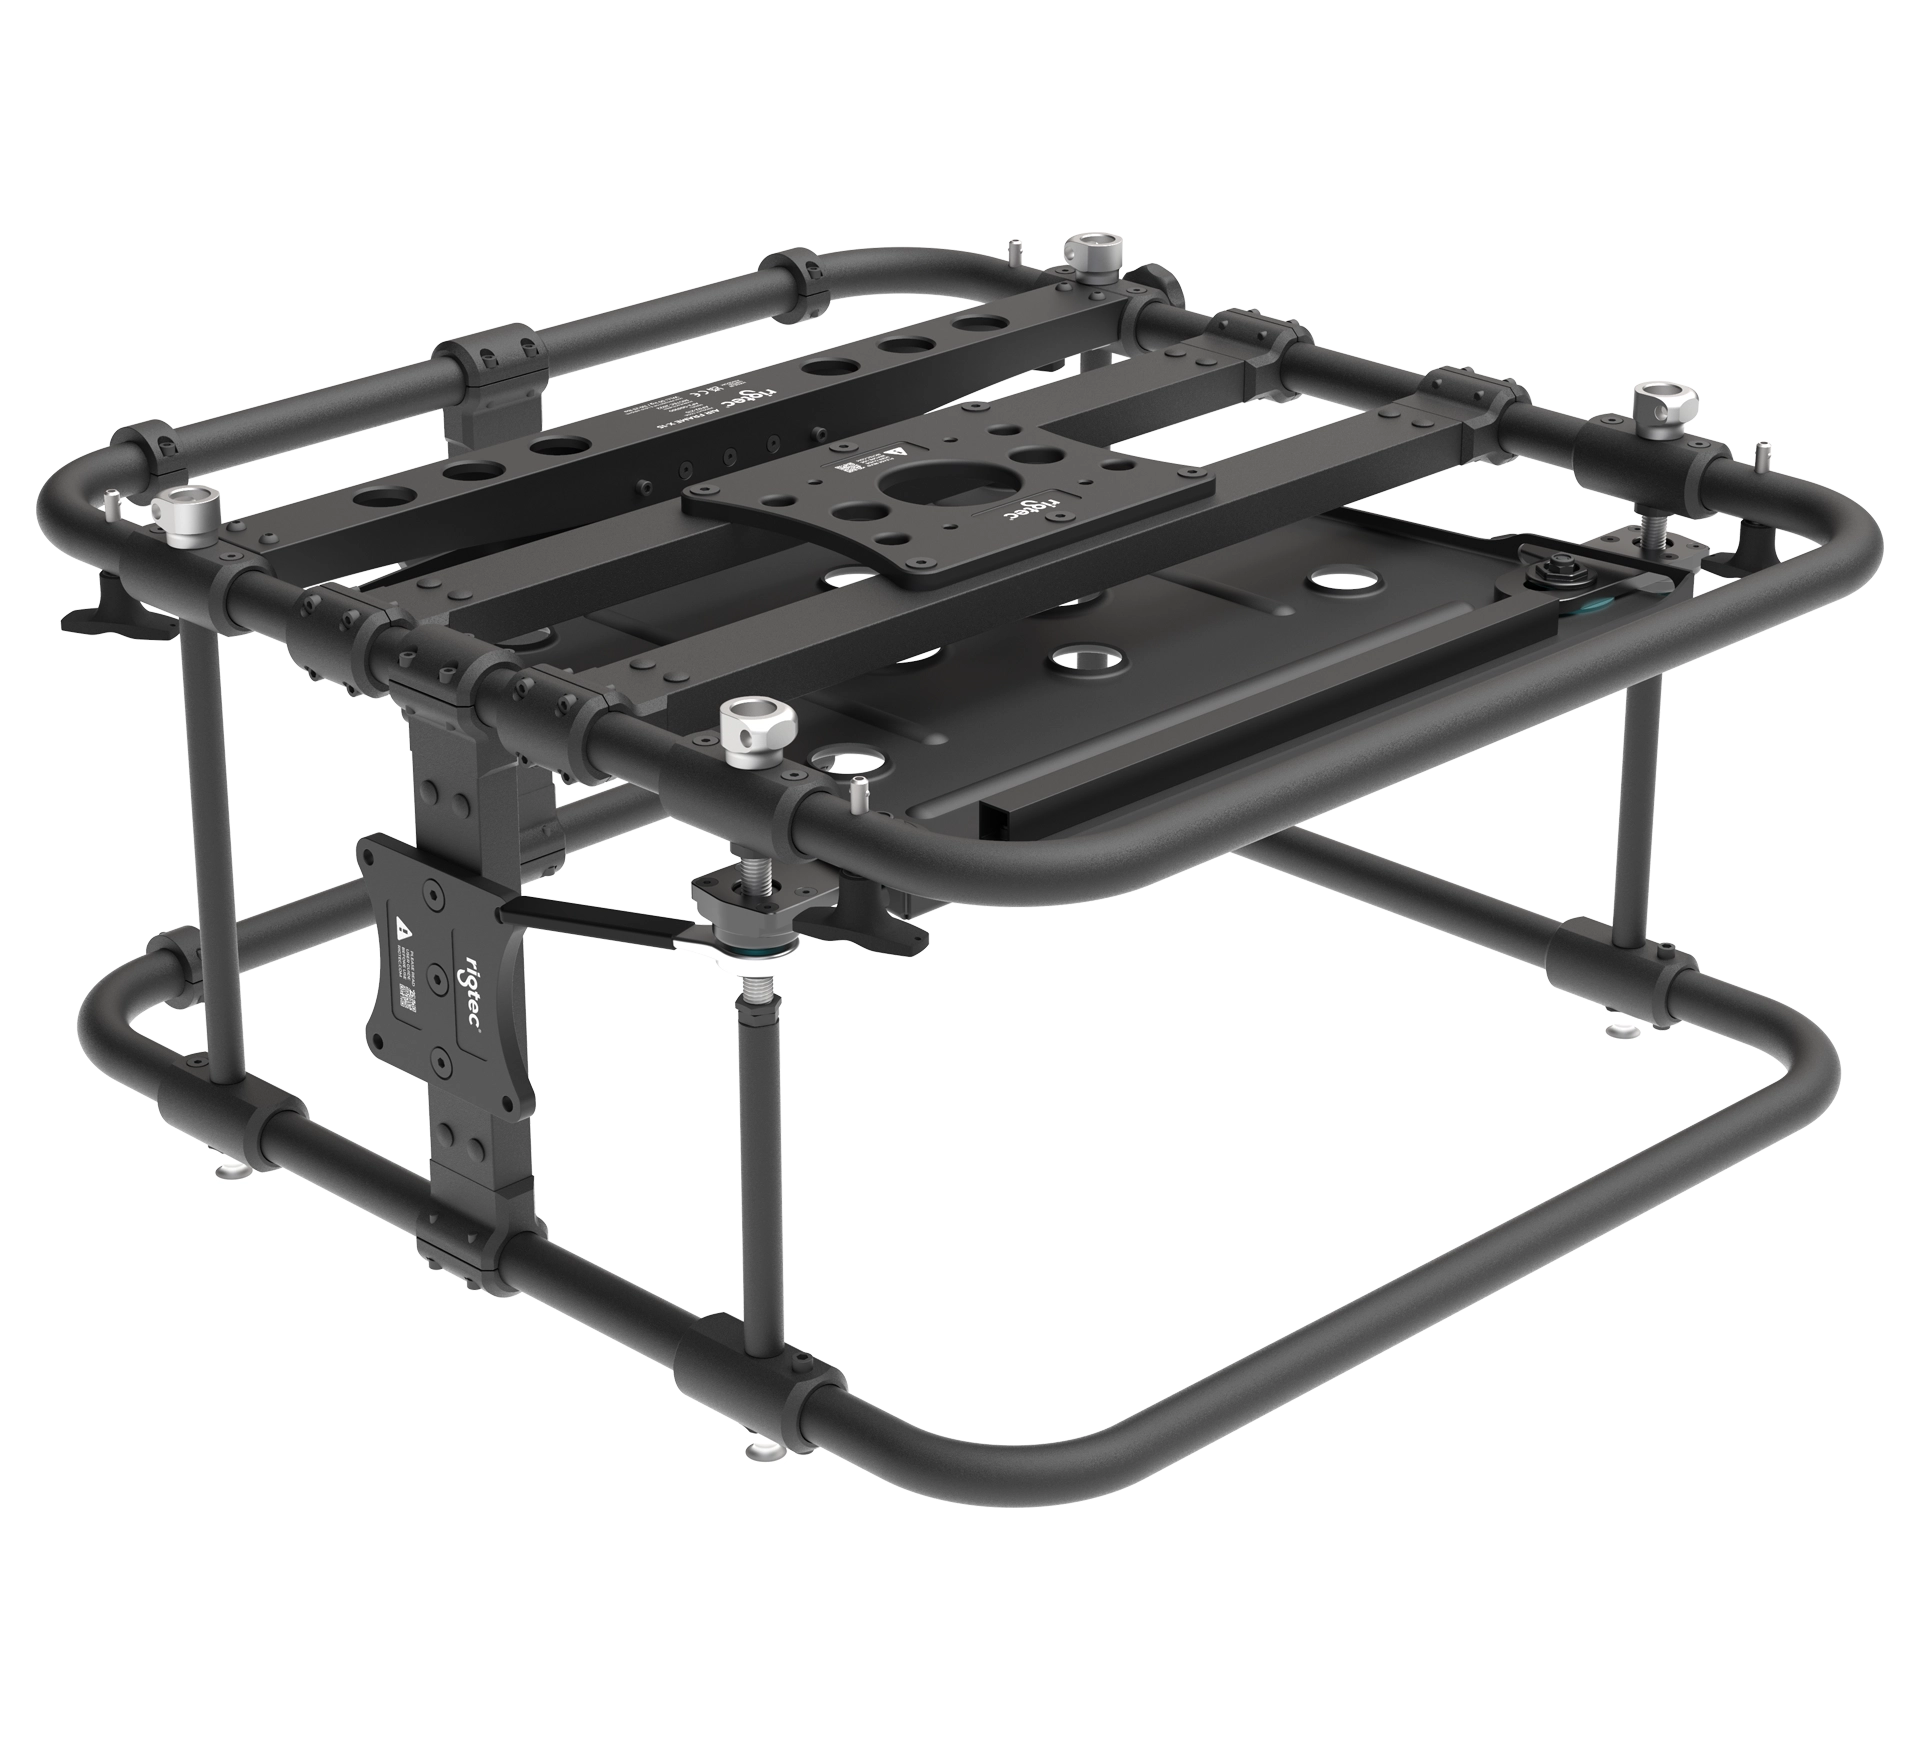 Rigtec Air Frame X15 Projector Rigging Frame showing portrait and landscape Atom Grip mounting plates